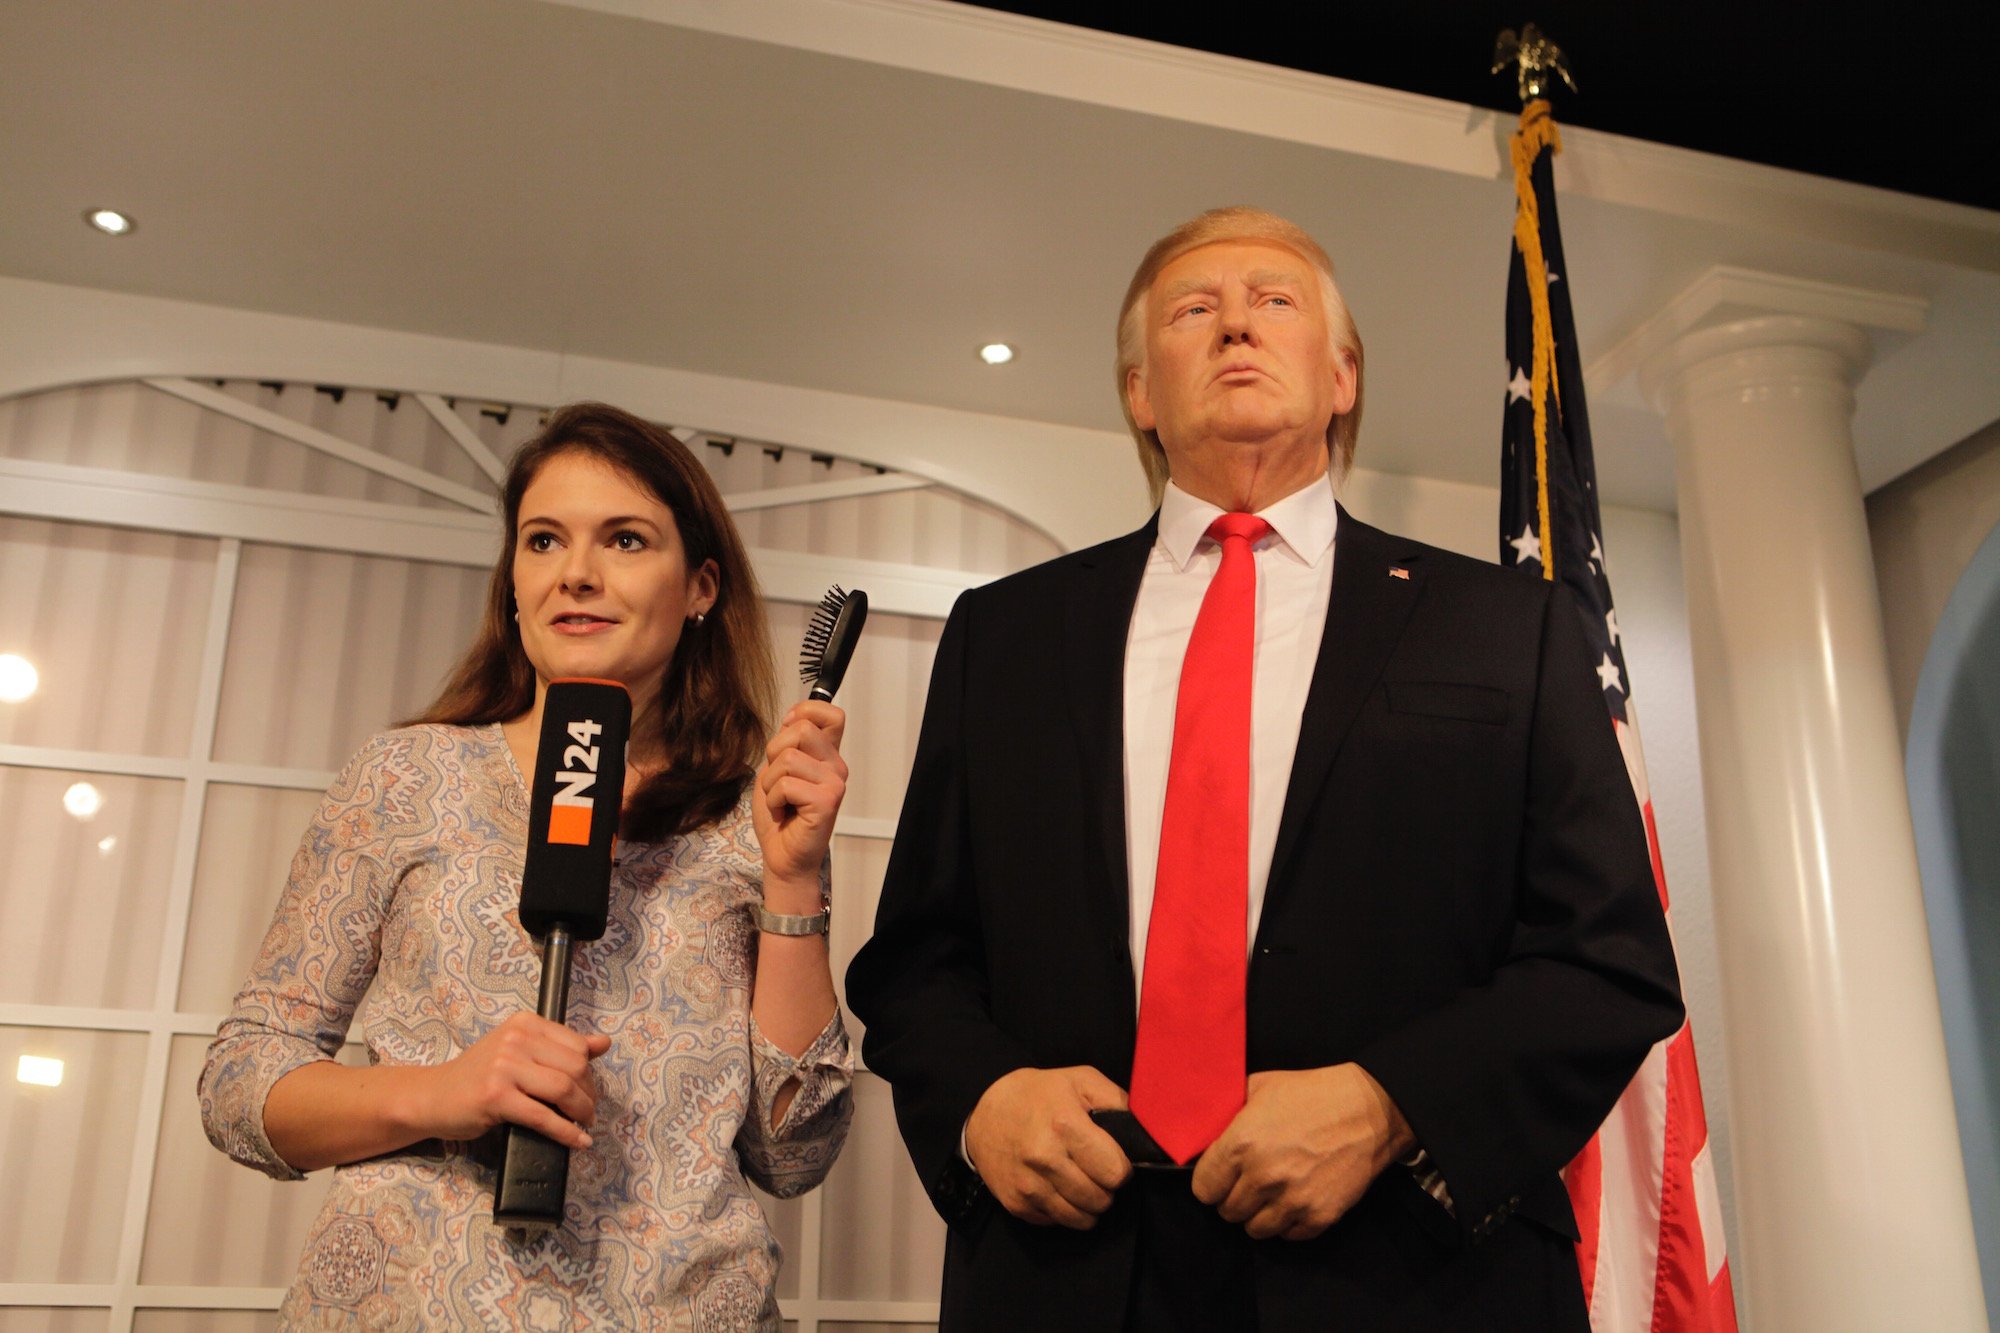 It Took Five Weeks to Get the Hair Right on Donald Trump’s Wax Figure